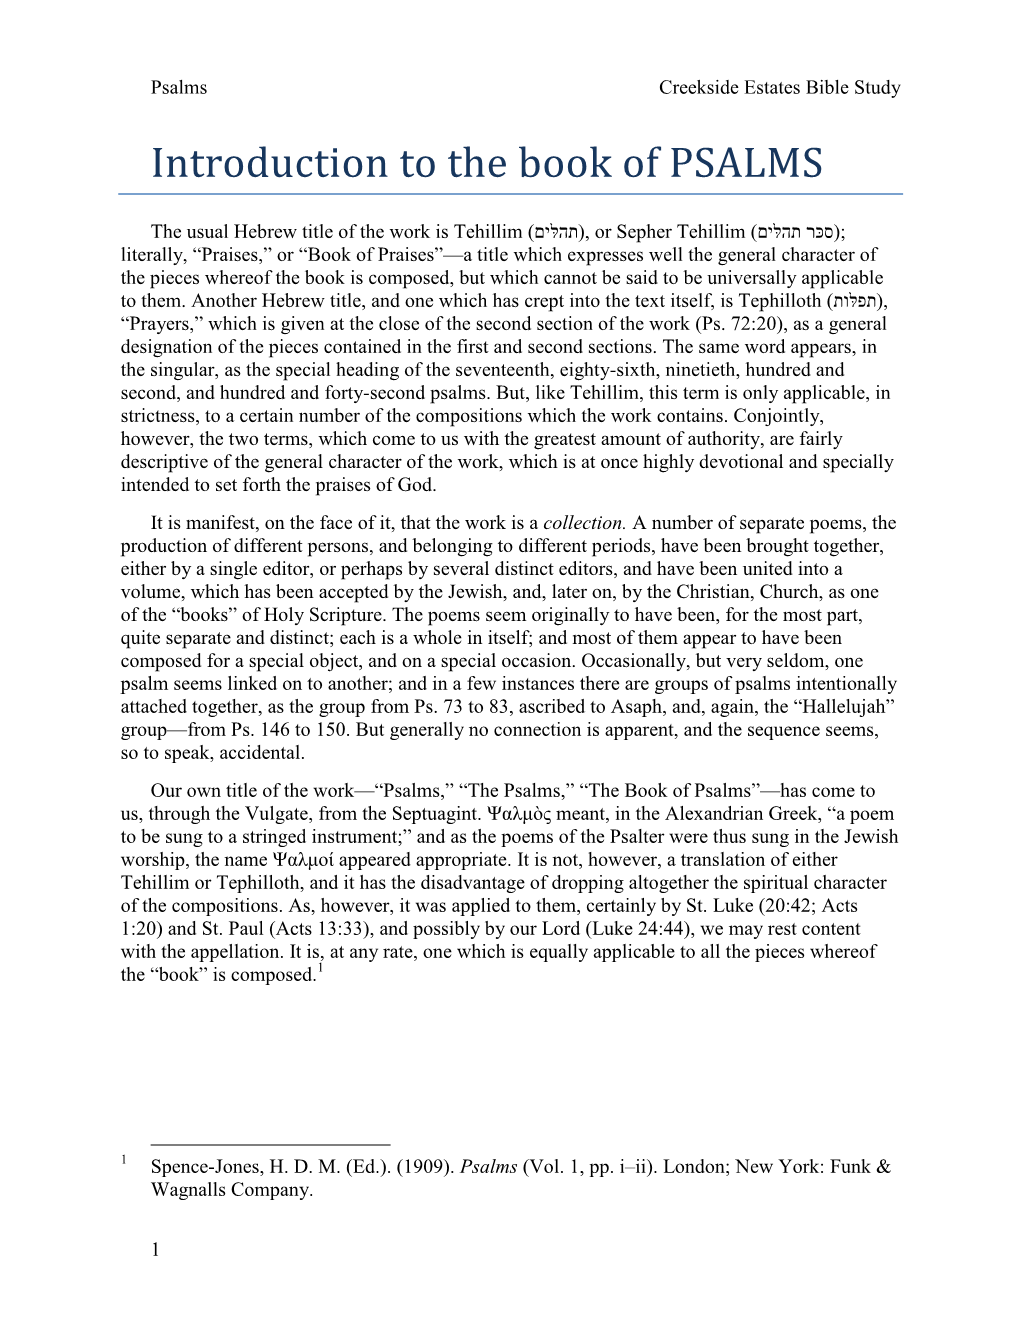 Introduction to the Book of PSALMS